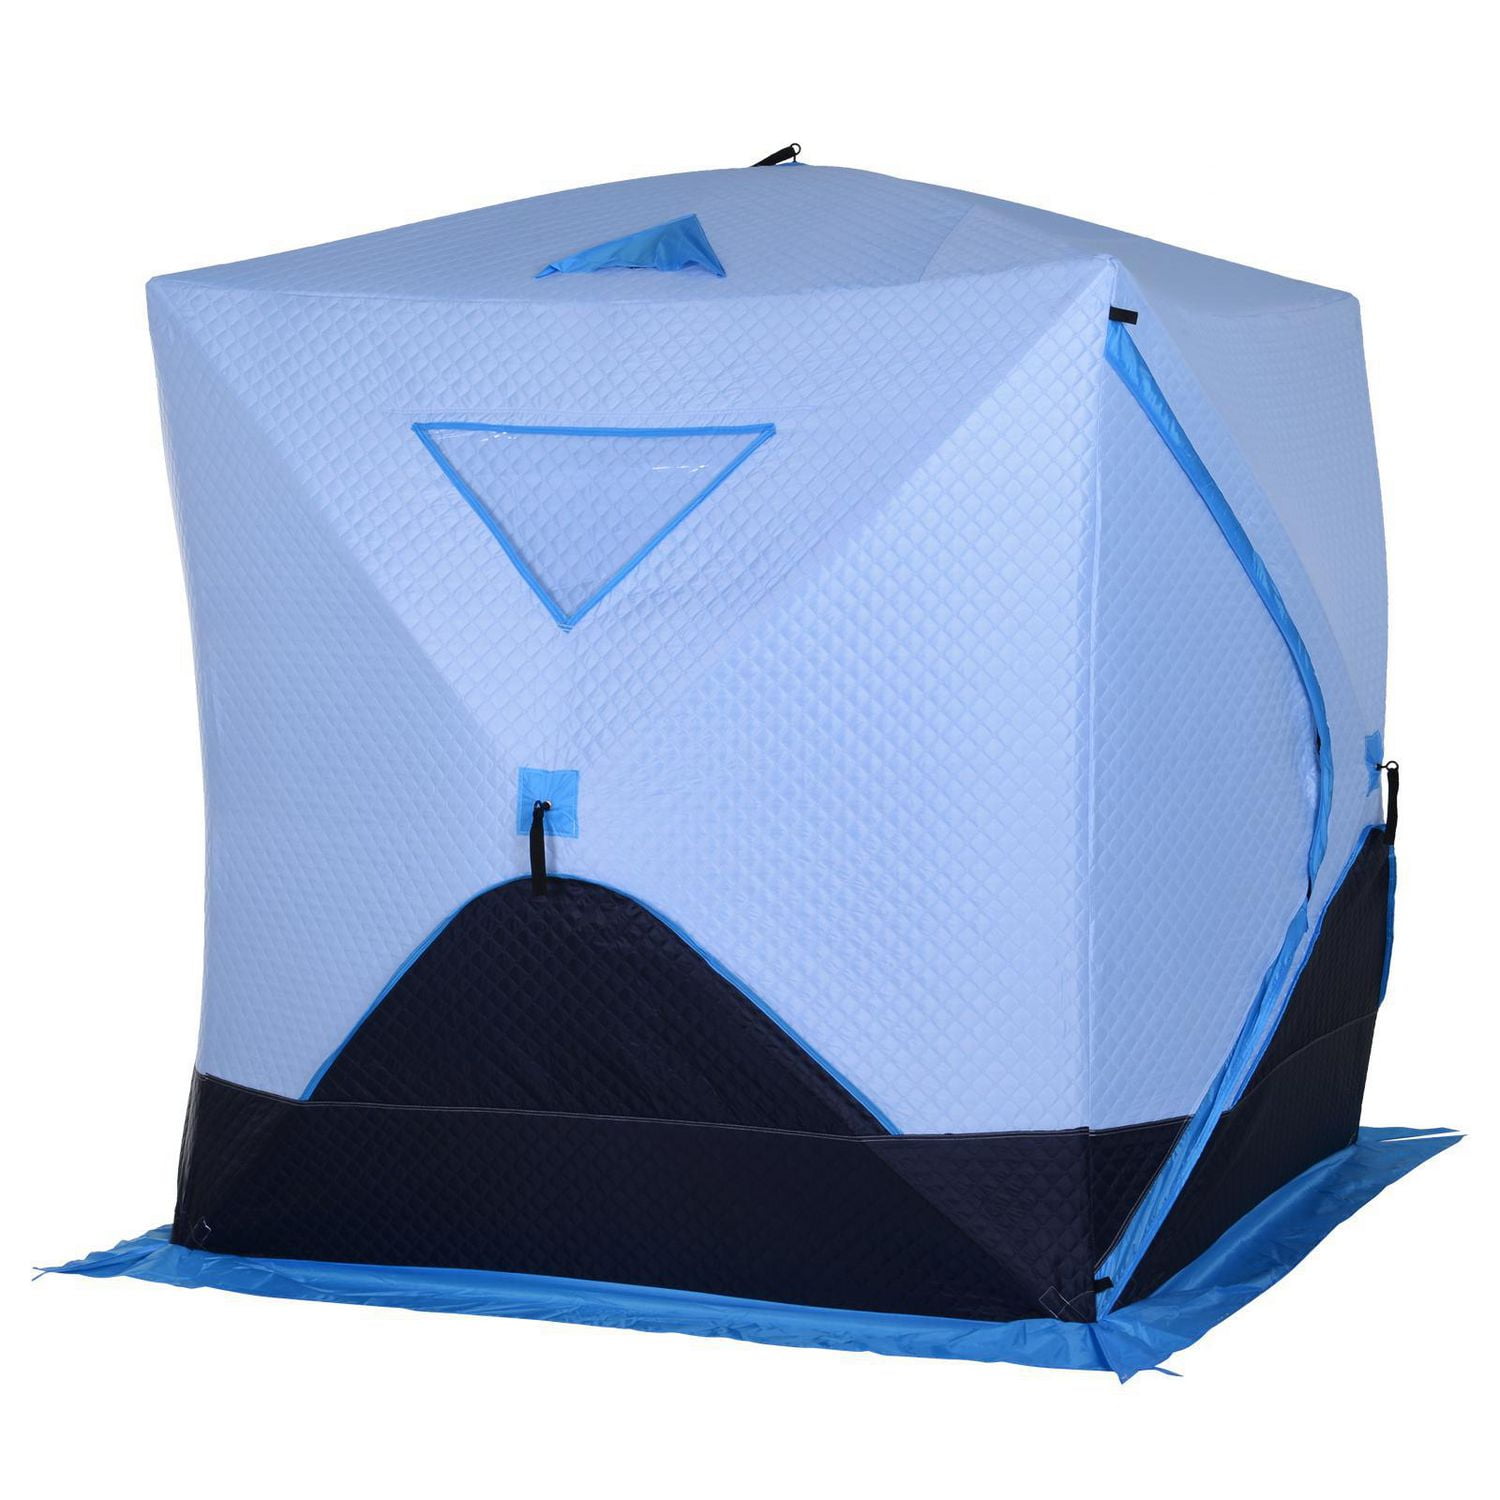 Outsunny 4-Person Portable Composite Ice Fishing Tent AB1-003